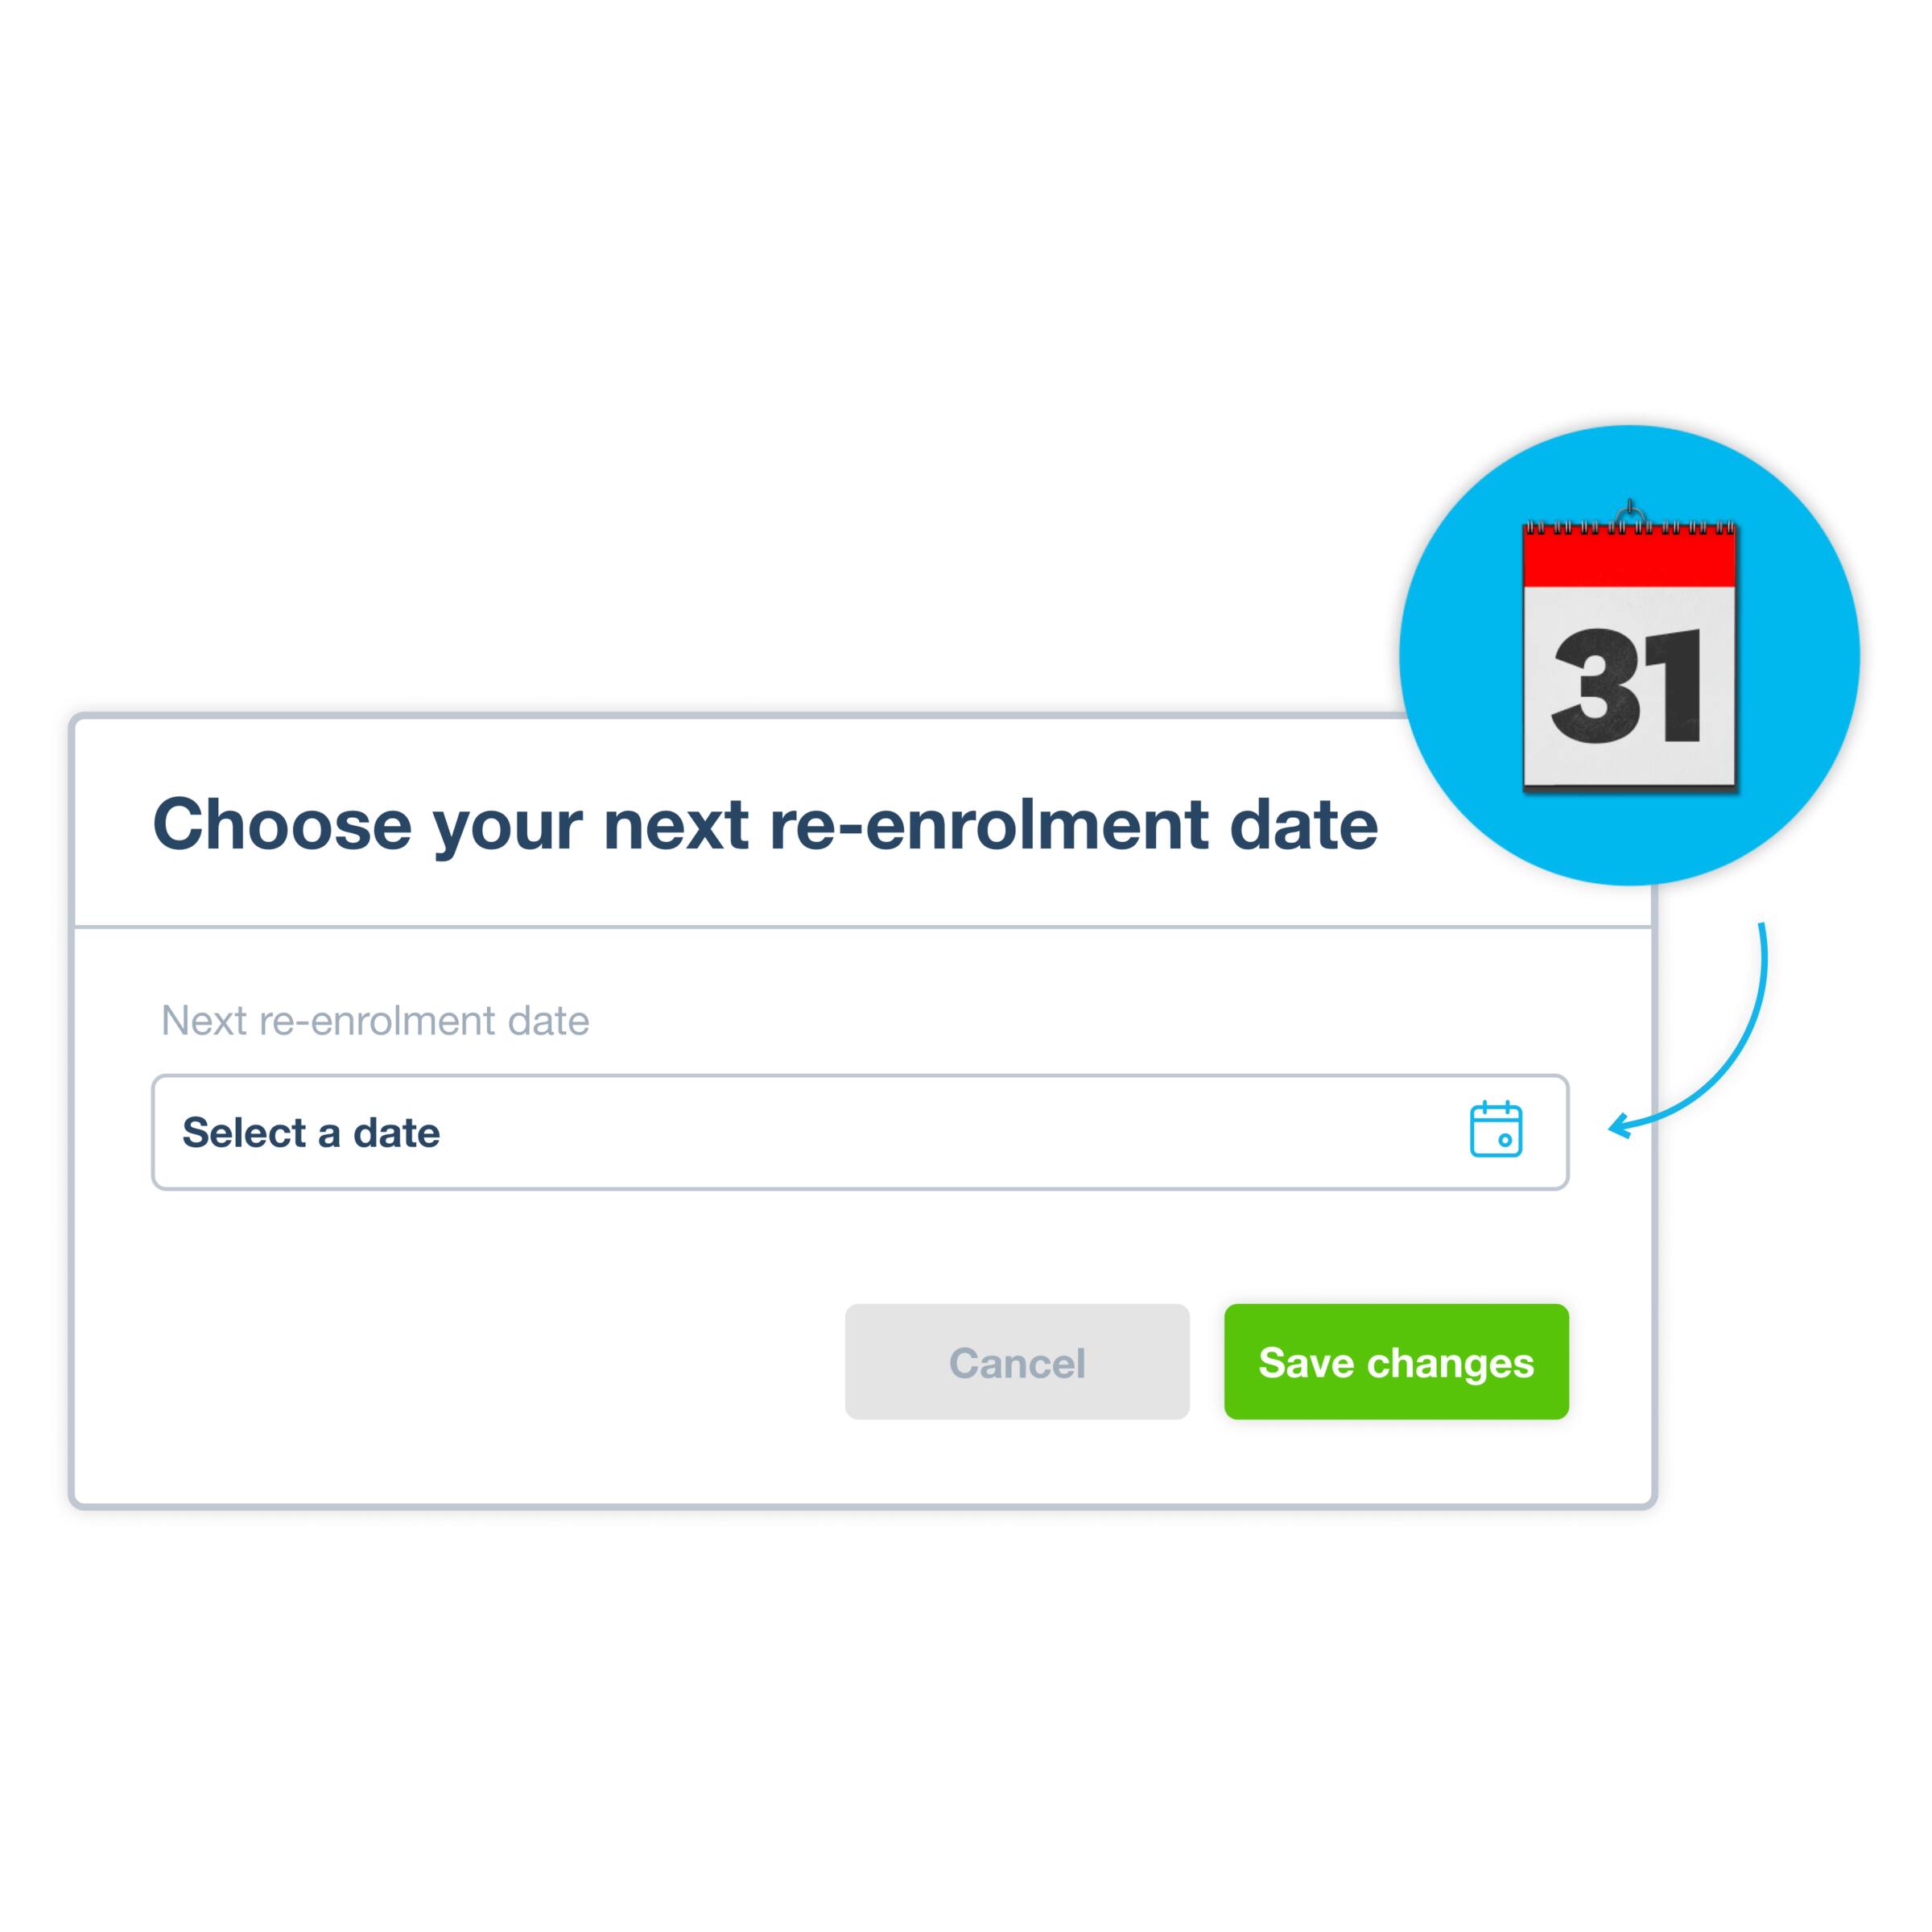 The pension screen lets you choose your next re-enrolment date.